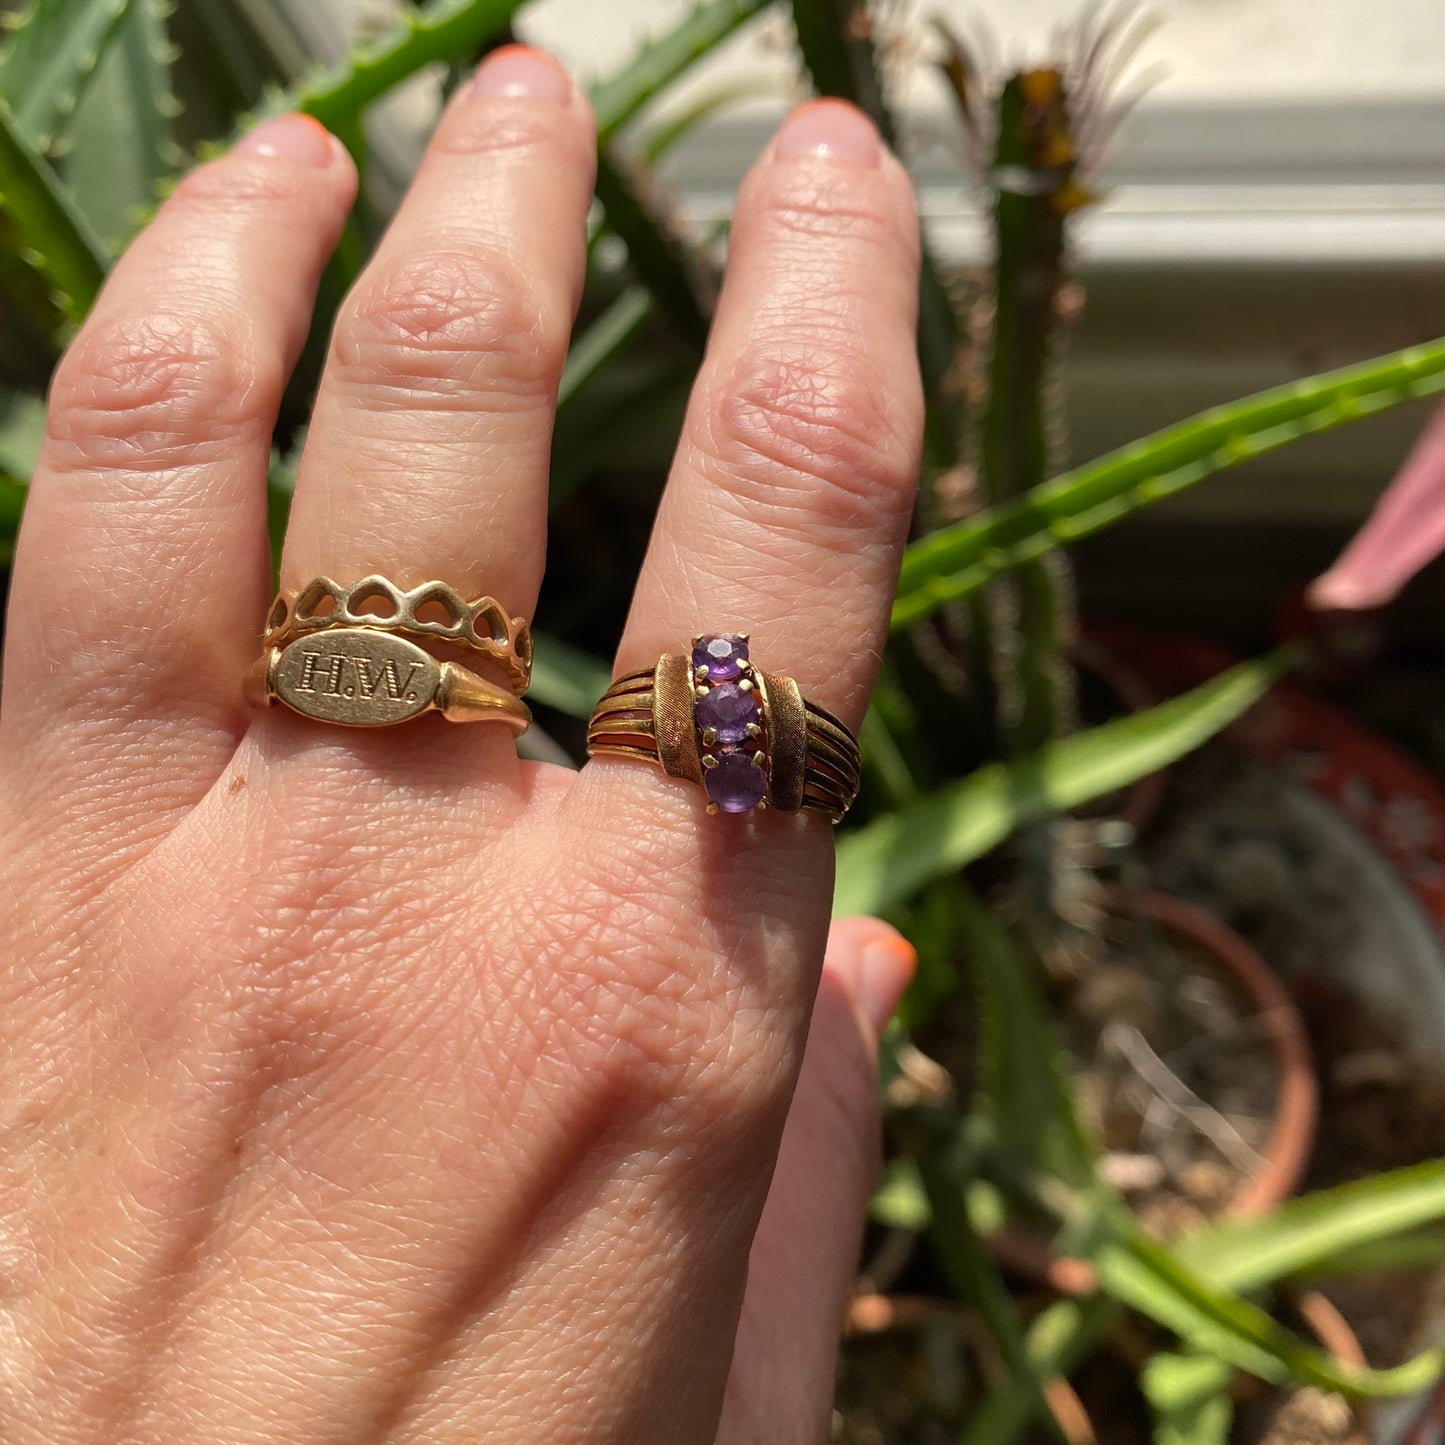 14k ring with 3 amethysts